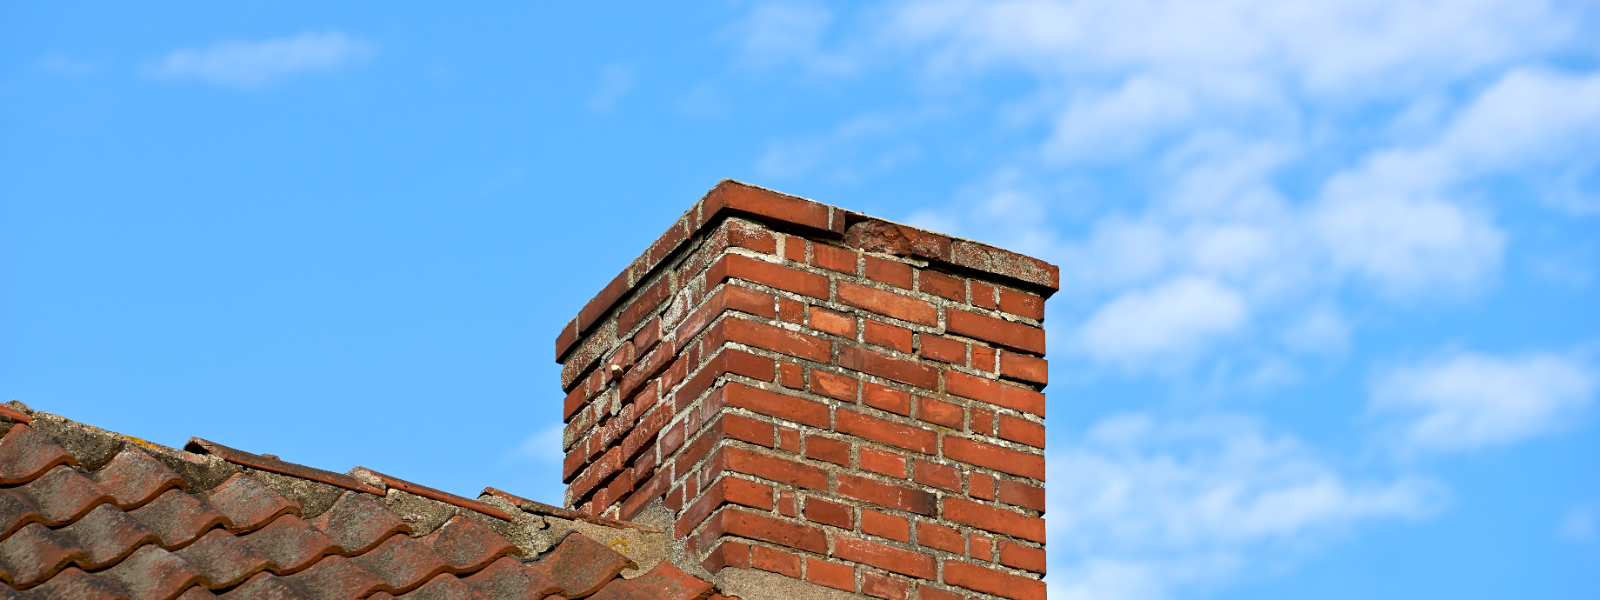 LASOVER OÜ - We specialize in comprehensive chimney solutions, construction work, and machinery rental services.